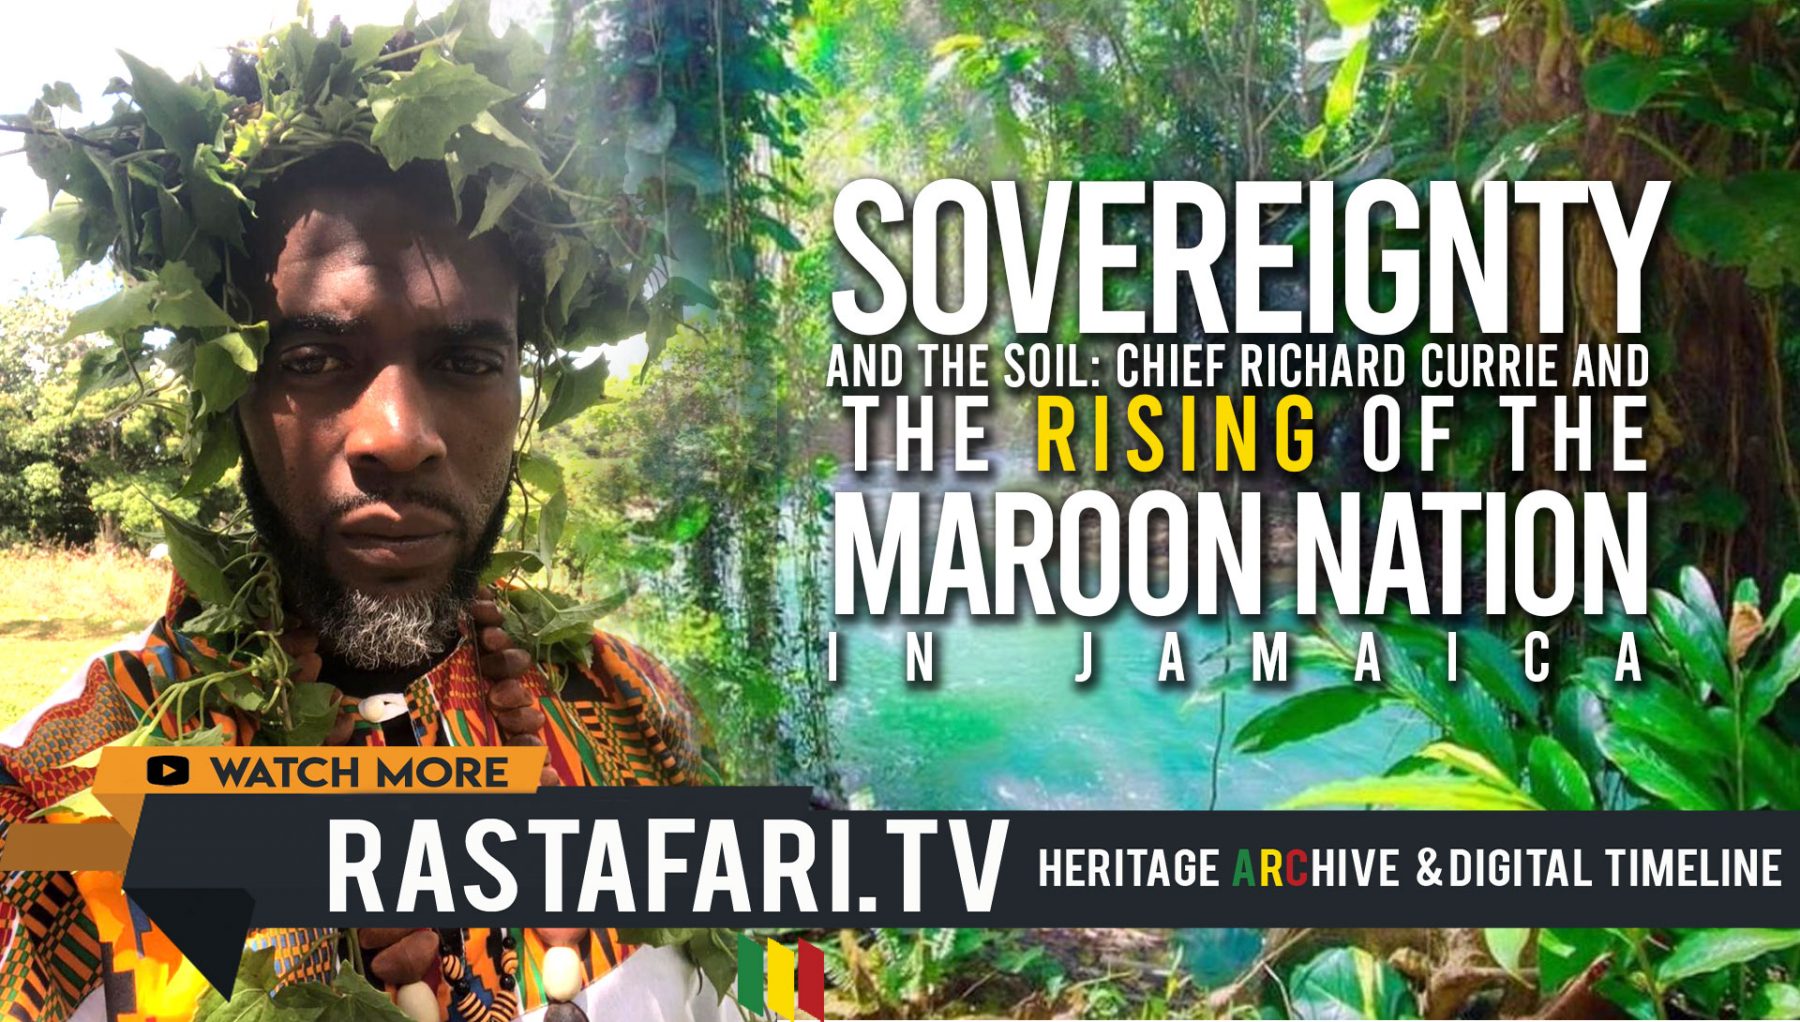 rastafari-tv-forbes-Sovereignty-And-The-Soil-Chief-Richard-Currie-And-The-Rising-Of-The-Maroon-Nation-In-Jamaica